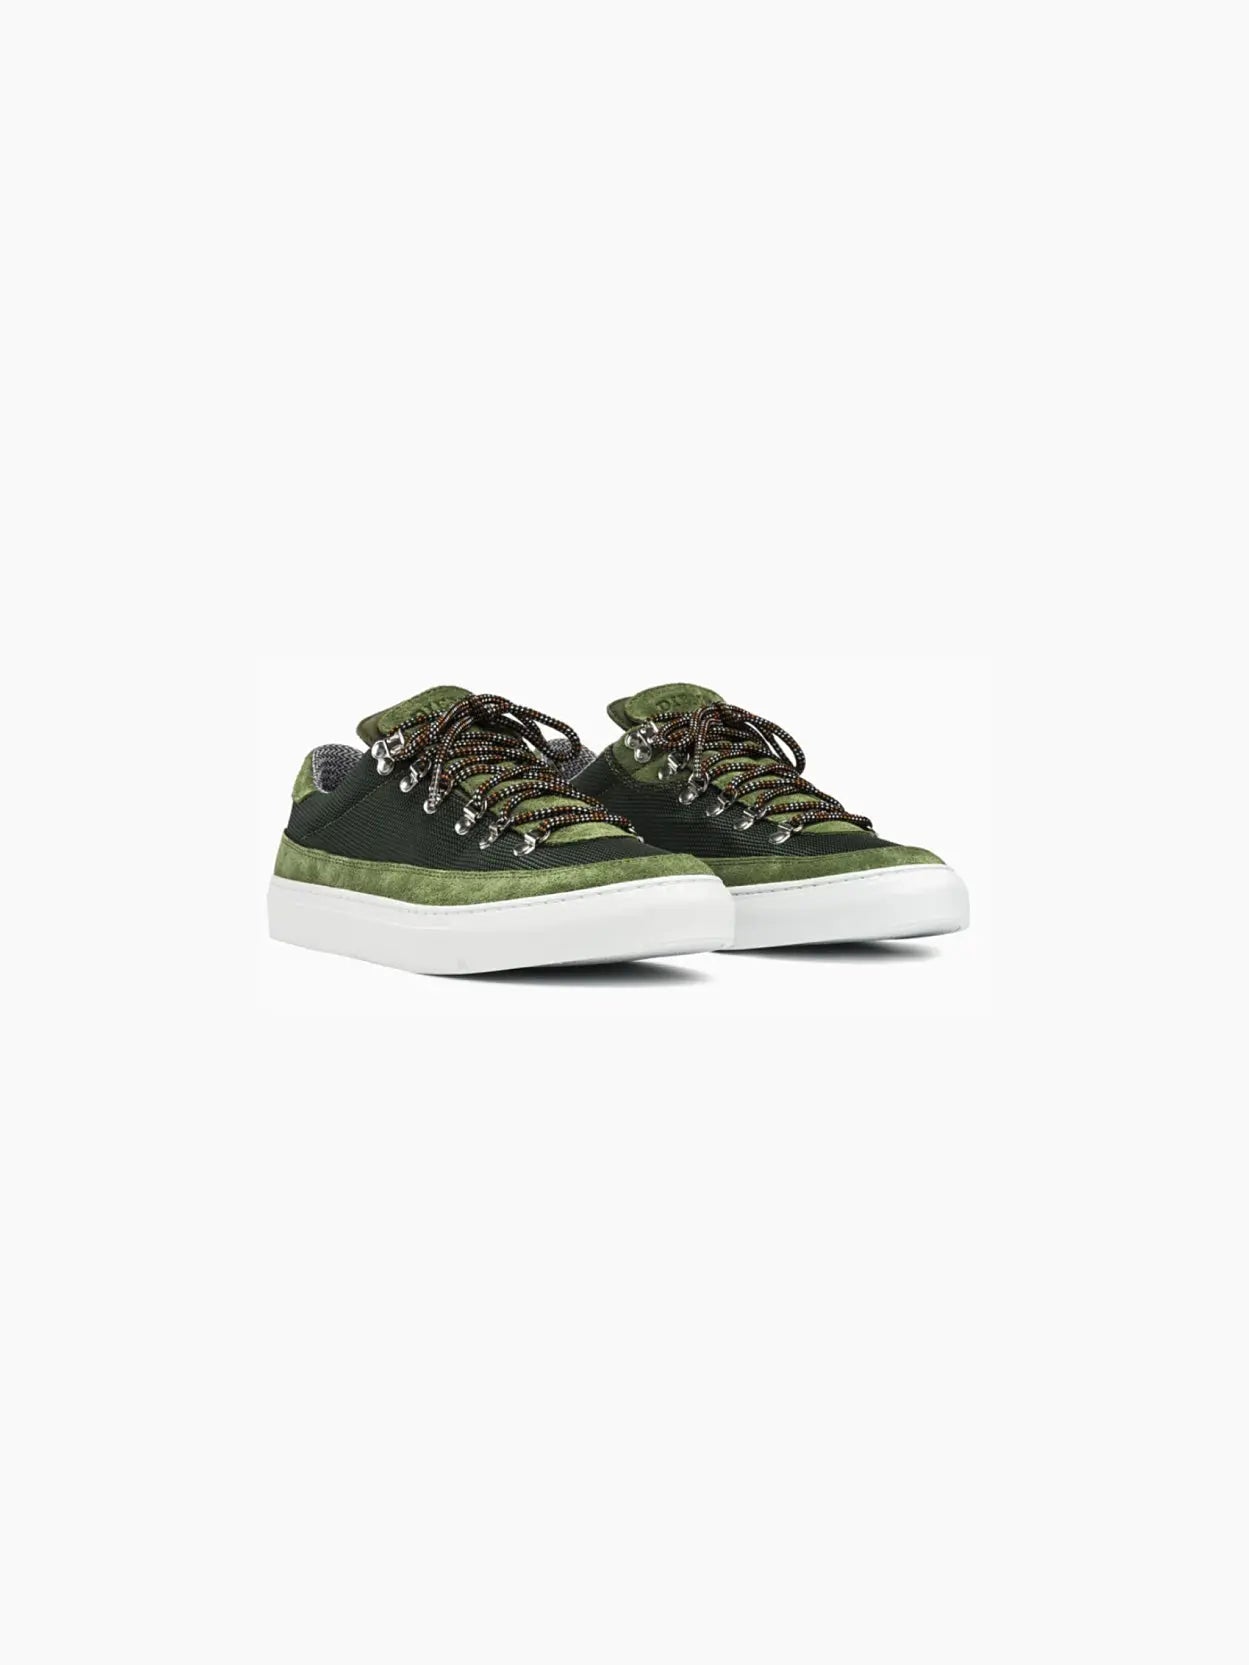 A single Marostica Low Evergreen sneaker by Diemme, from Bassal Store in Barcelona, is displayed on a white background. The shoe features bright green laces, silver eyelets, and a white sole. The upper part is made with a mix of dark green and olive green fabric, giving it a textured appearance.